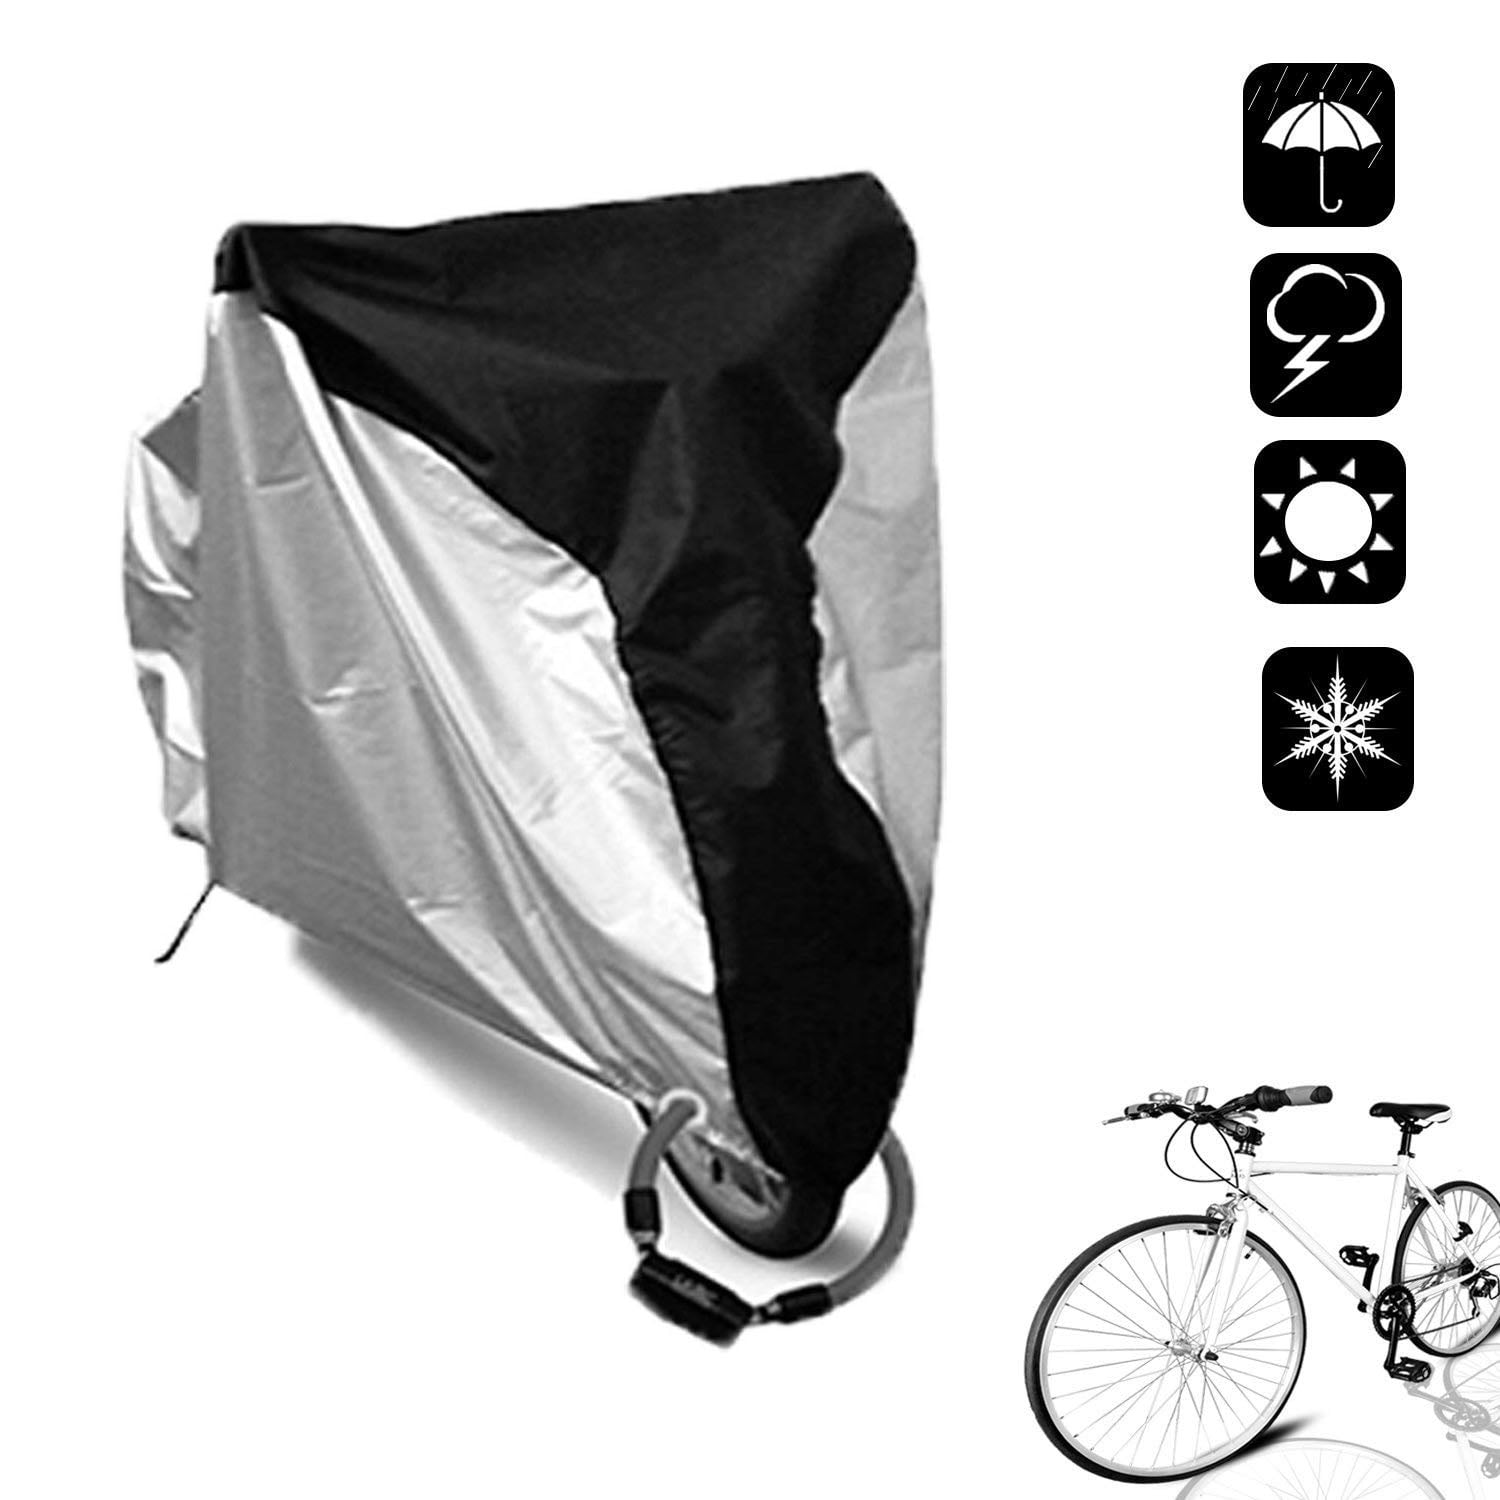 Road Bike Details about   ATCG Bike Cover 190T Nylon Waterproof Bicycle Cover for Mountain Bike 